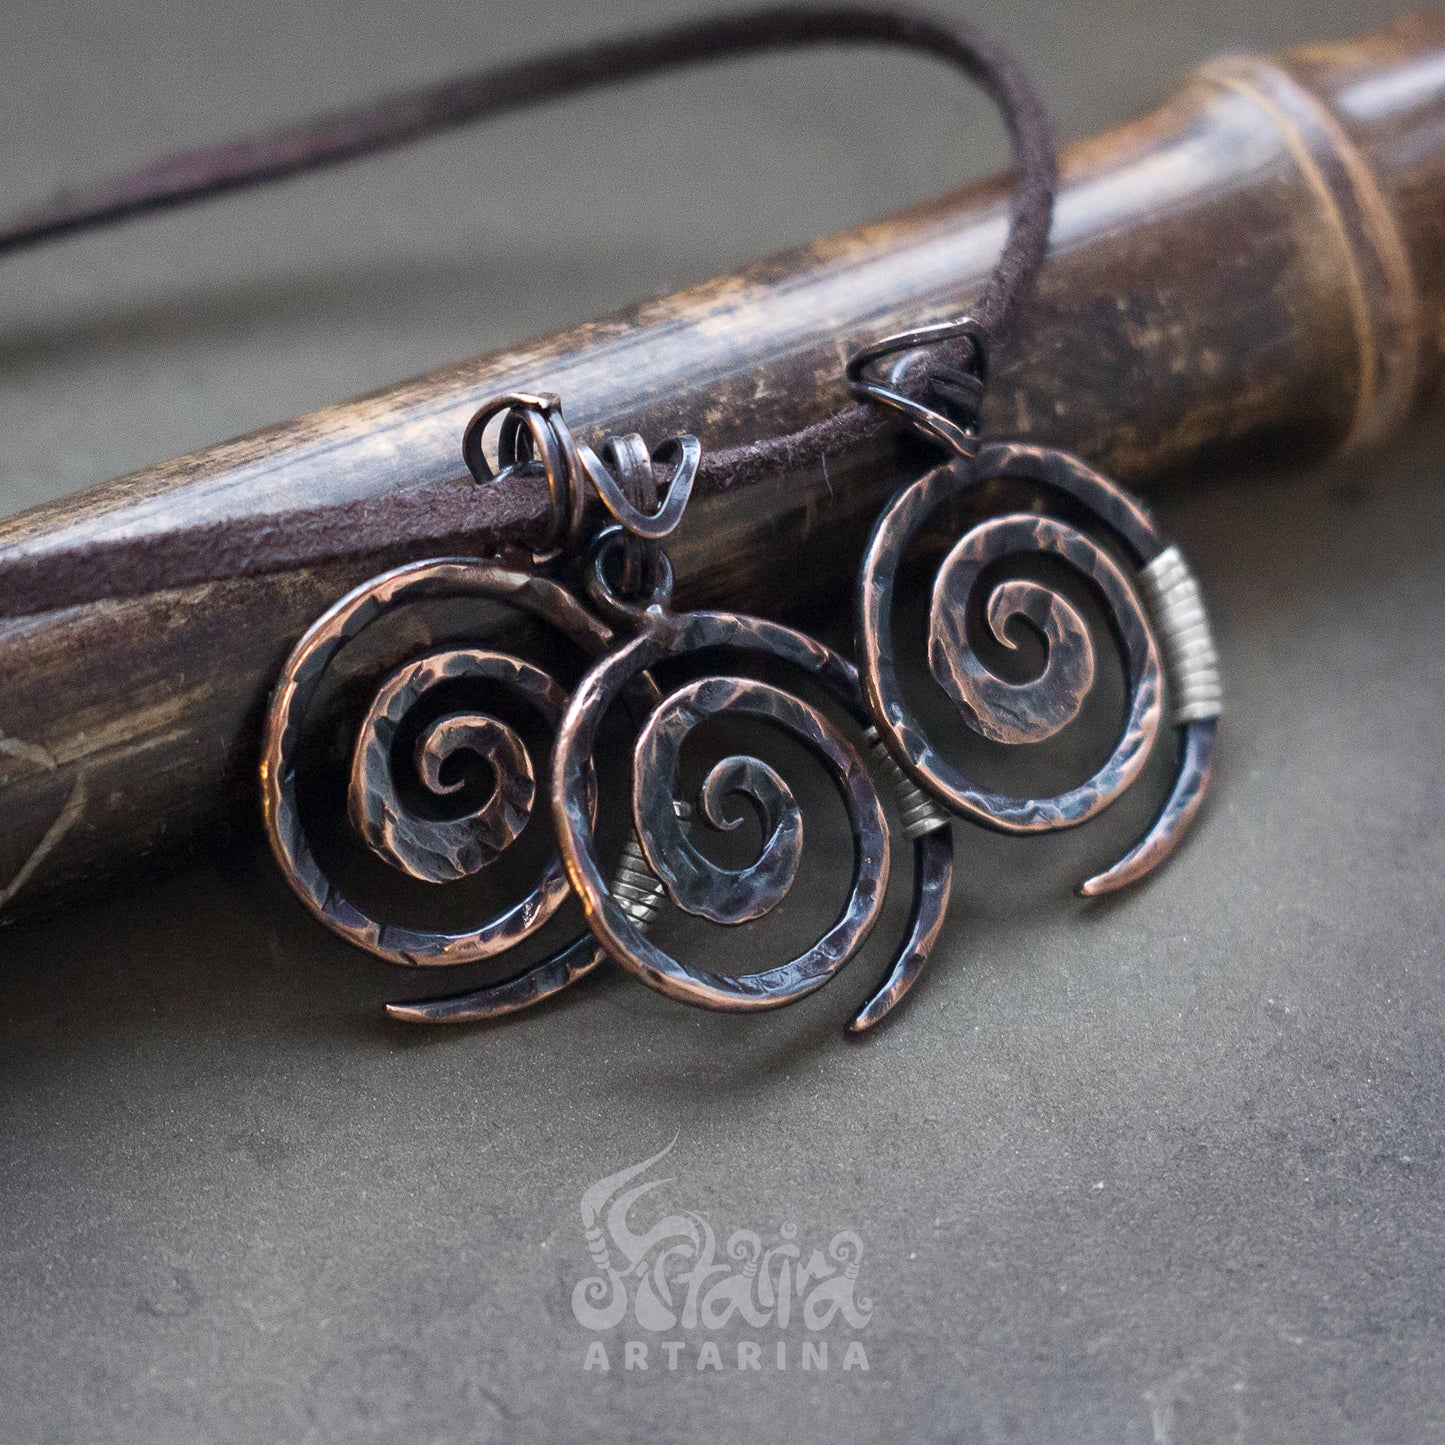 Oxidized rustic copper hammered spiral necklace / Rustic boho sacred symbol necklace pic 4